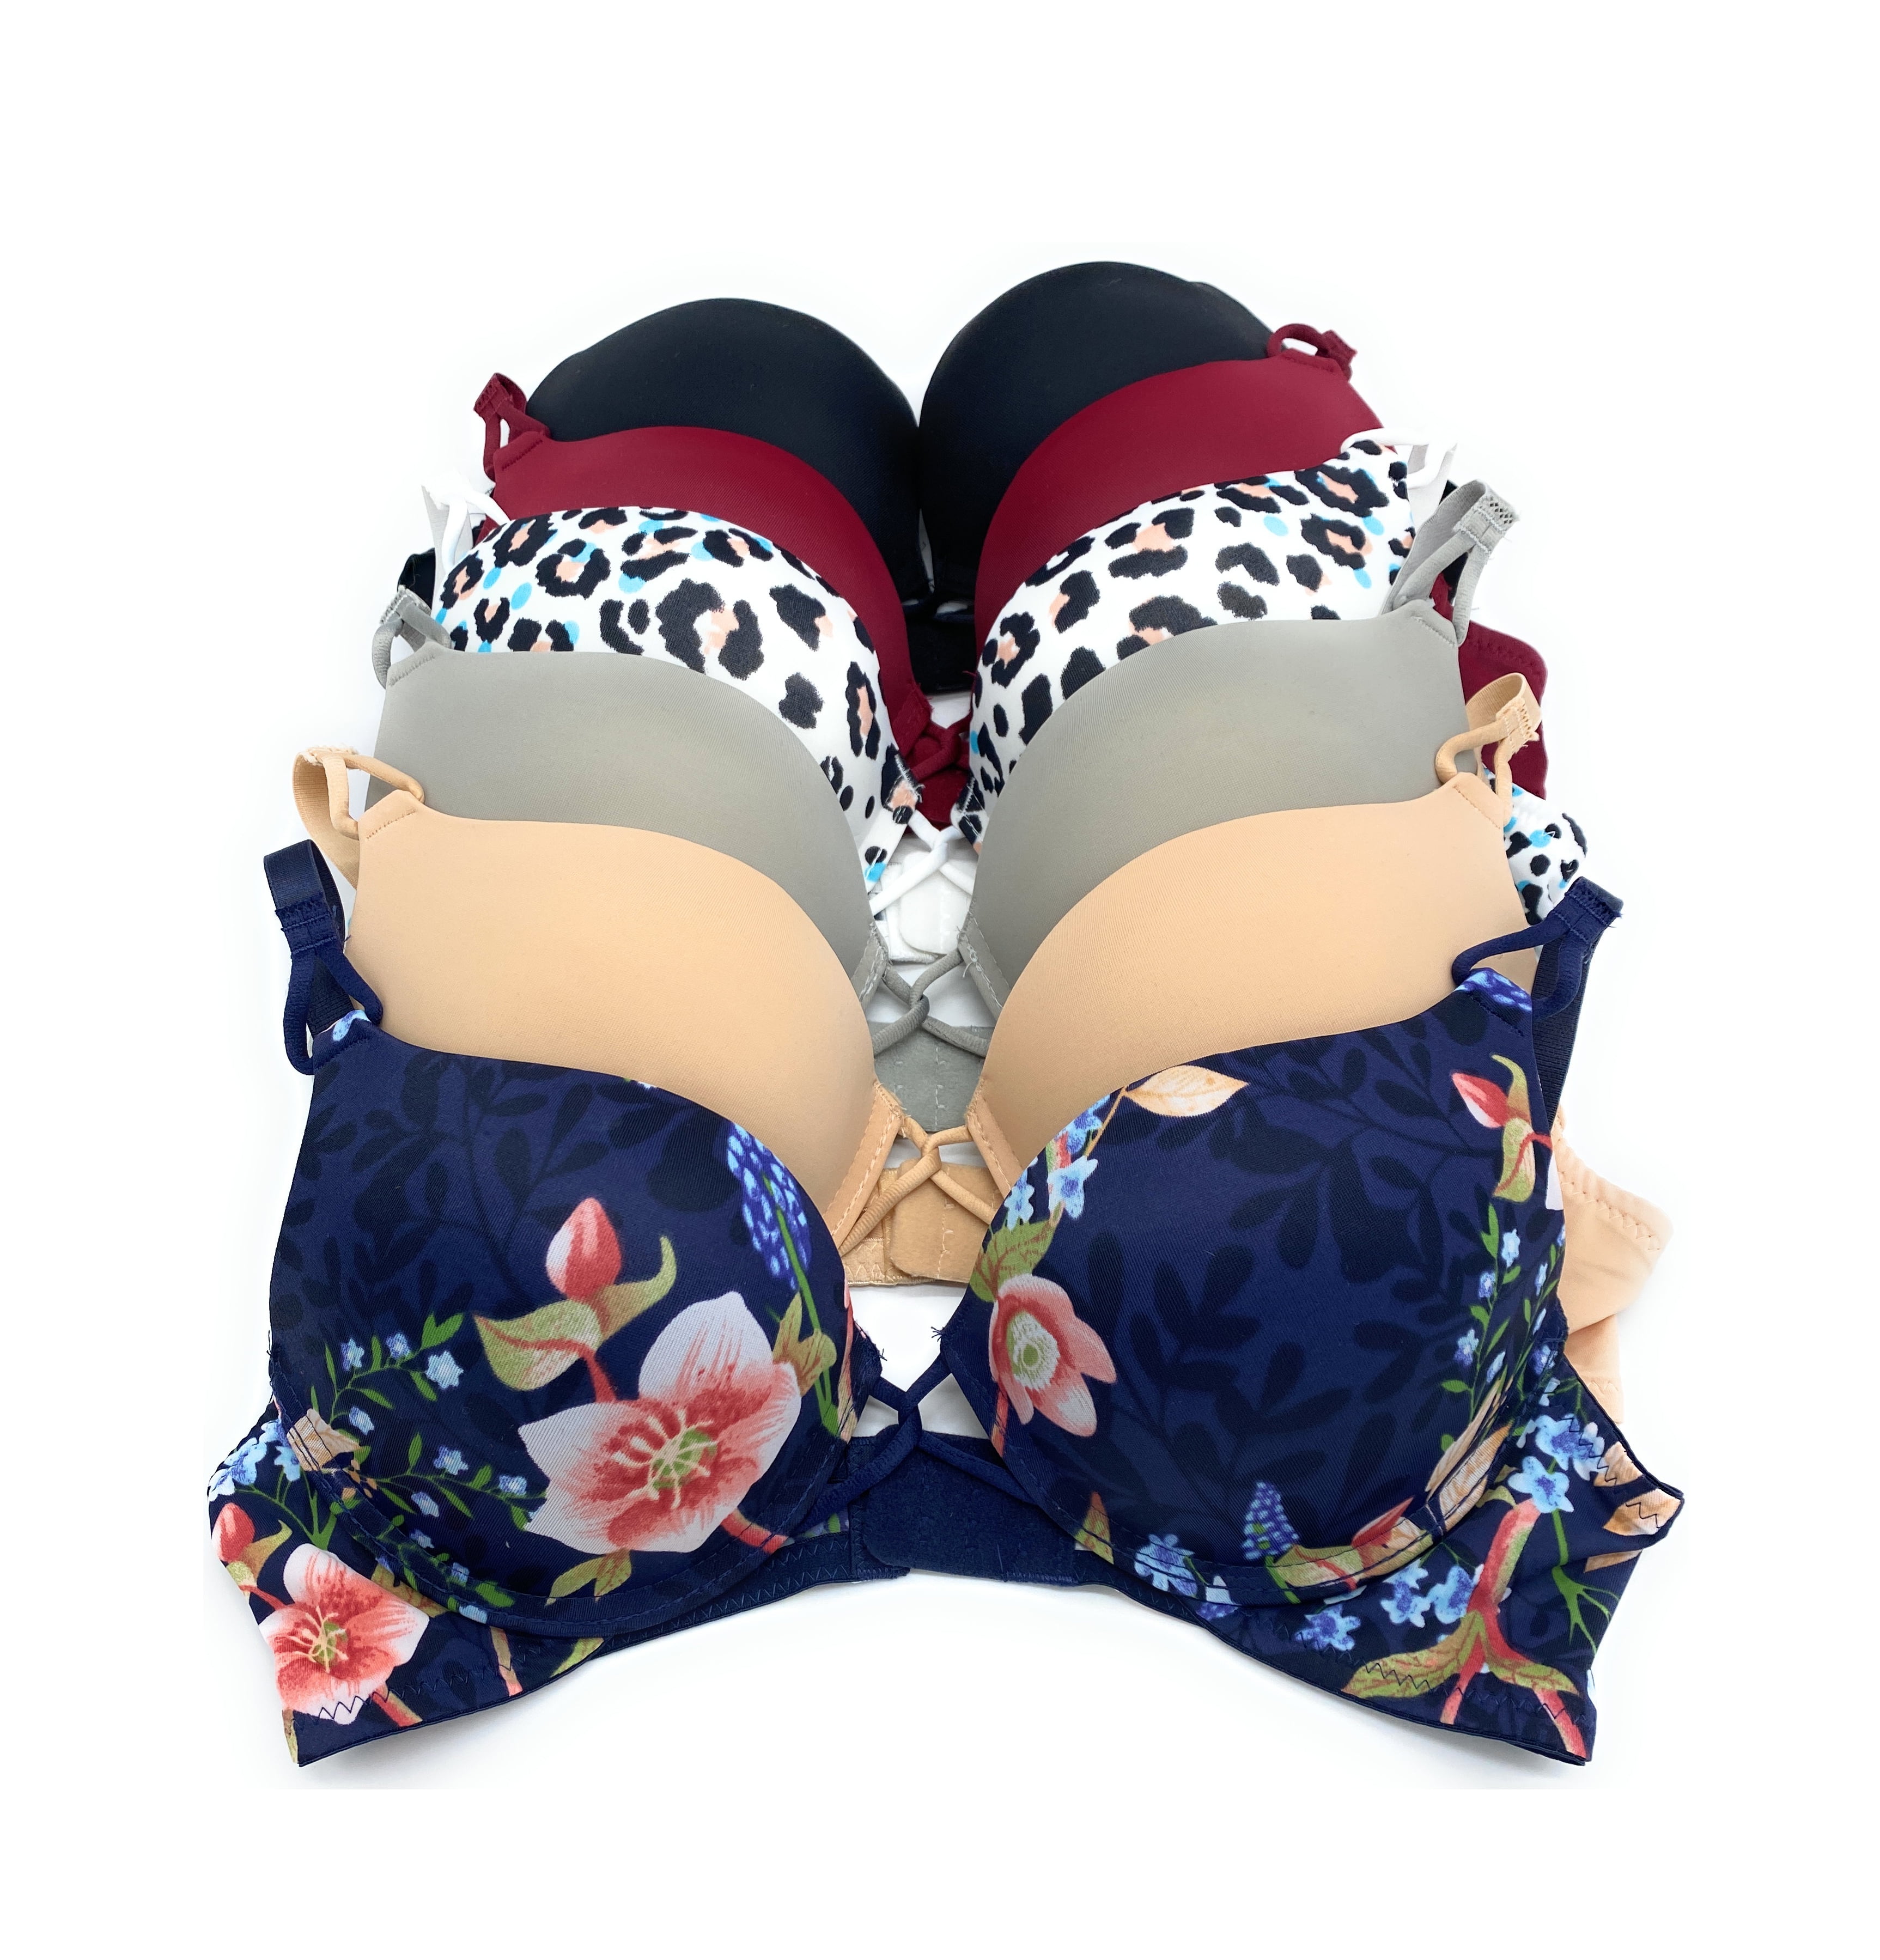 New Big Size Bra Set 34/75 36/80 38/85 40/90 42/95 B C D E Cup Push Up  Basic Bra Women T Shirt Panty Sets Plus Size1 From Linwoliao, $47.43